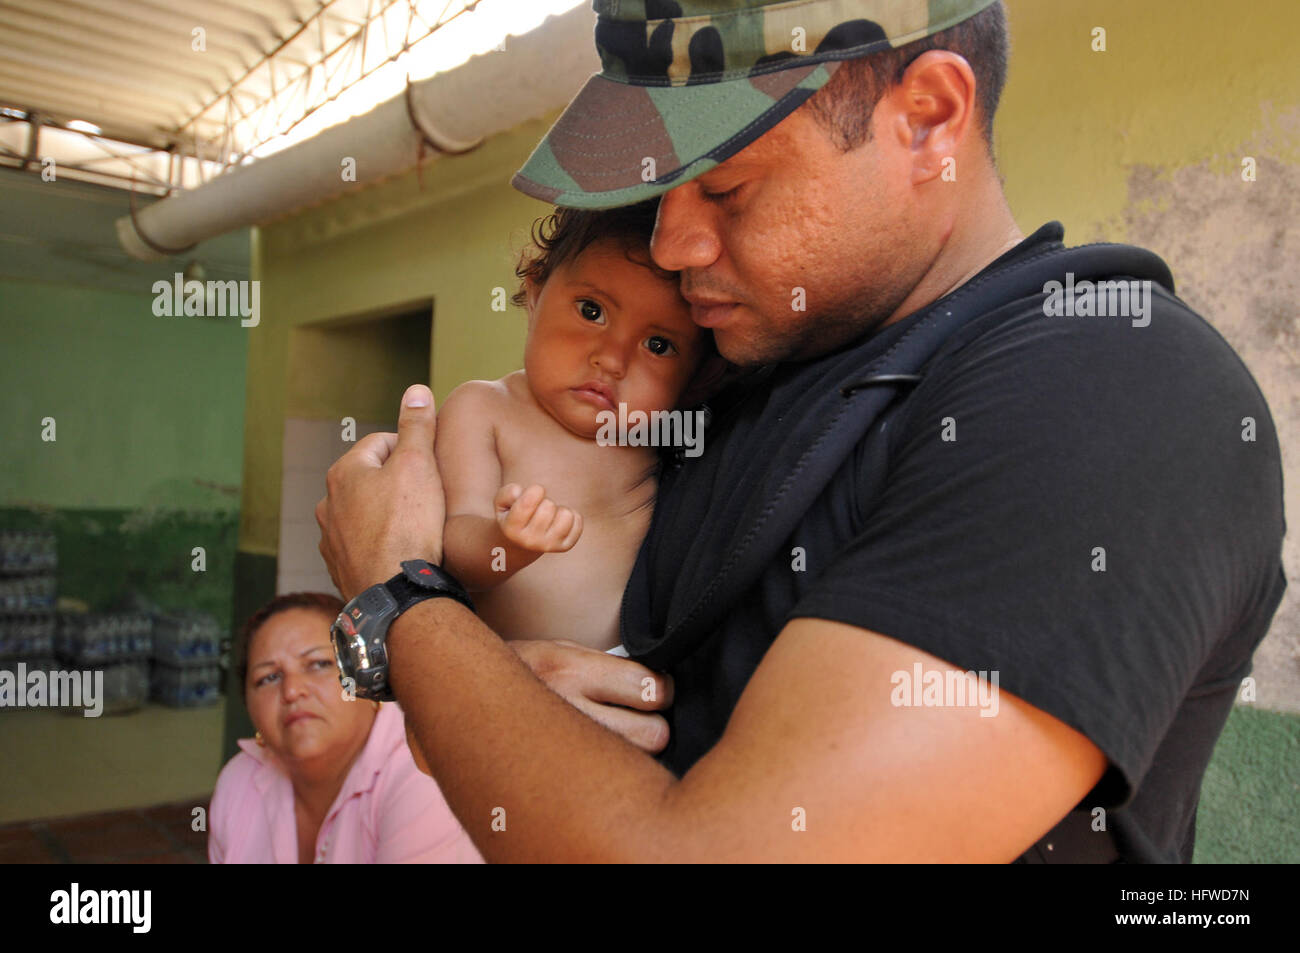 080903-N-8907D-126  PALMIRA, Colombia (Sept. 1, 2008) Machinist Mate 1st Class Samuel Ramos, assigned to the amphibious assault ship USS Kearsarge (LHD 3), comforts a child at the Palmira medical site during the Caribbean phase of Continuing Promise (CP) 2008. CP is an equal partnership mission between the United States, Canada, the Netherlands, Brazil, Nicaragua, Panama, Columbia, Dominican Republic, Trinidad and Tobago and Guyana. U.S. Navy photo by Mass Communication Specialist 3rd Class David Danals (Released) US Navy 080903-N-8907D-126 Machinist Mate 1st Class Samuel Ramos, assigned to th Stock Photo